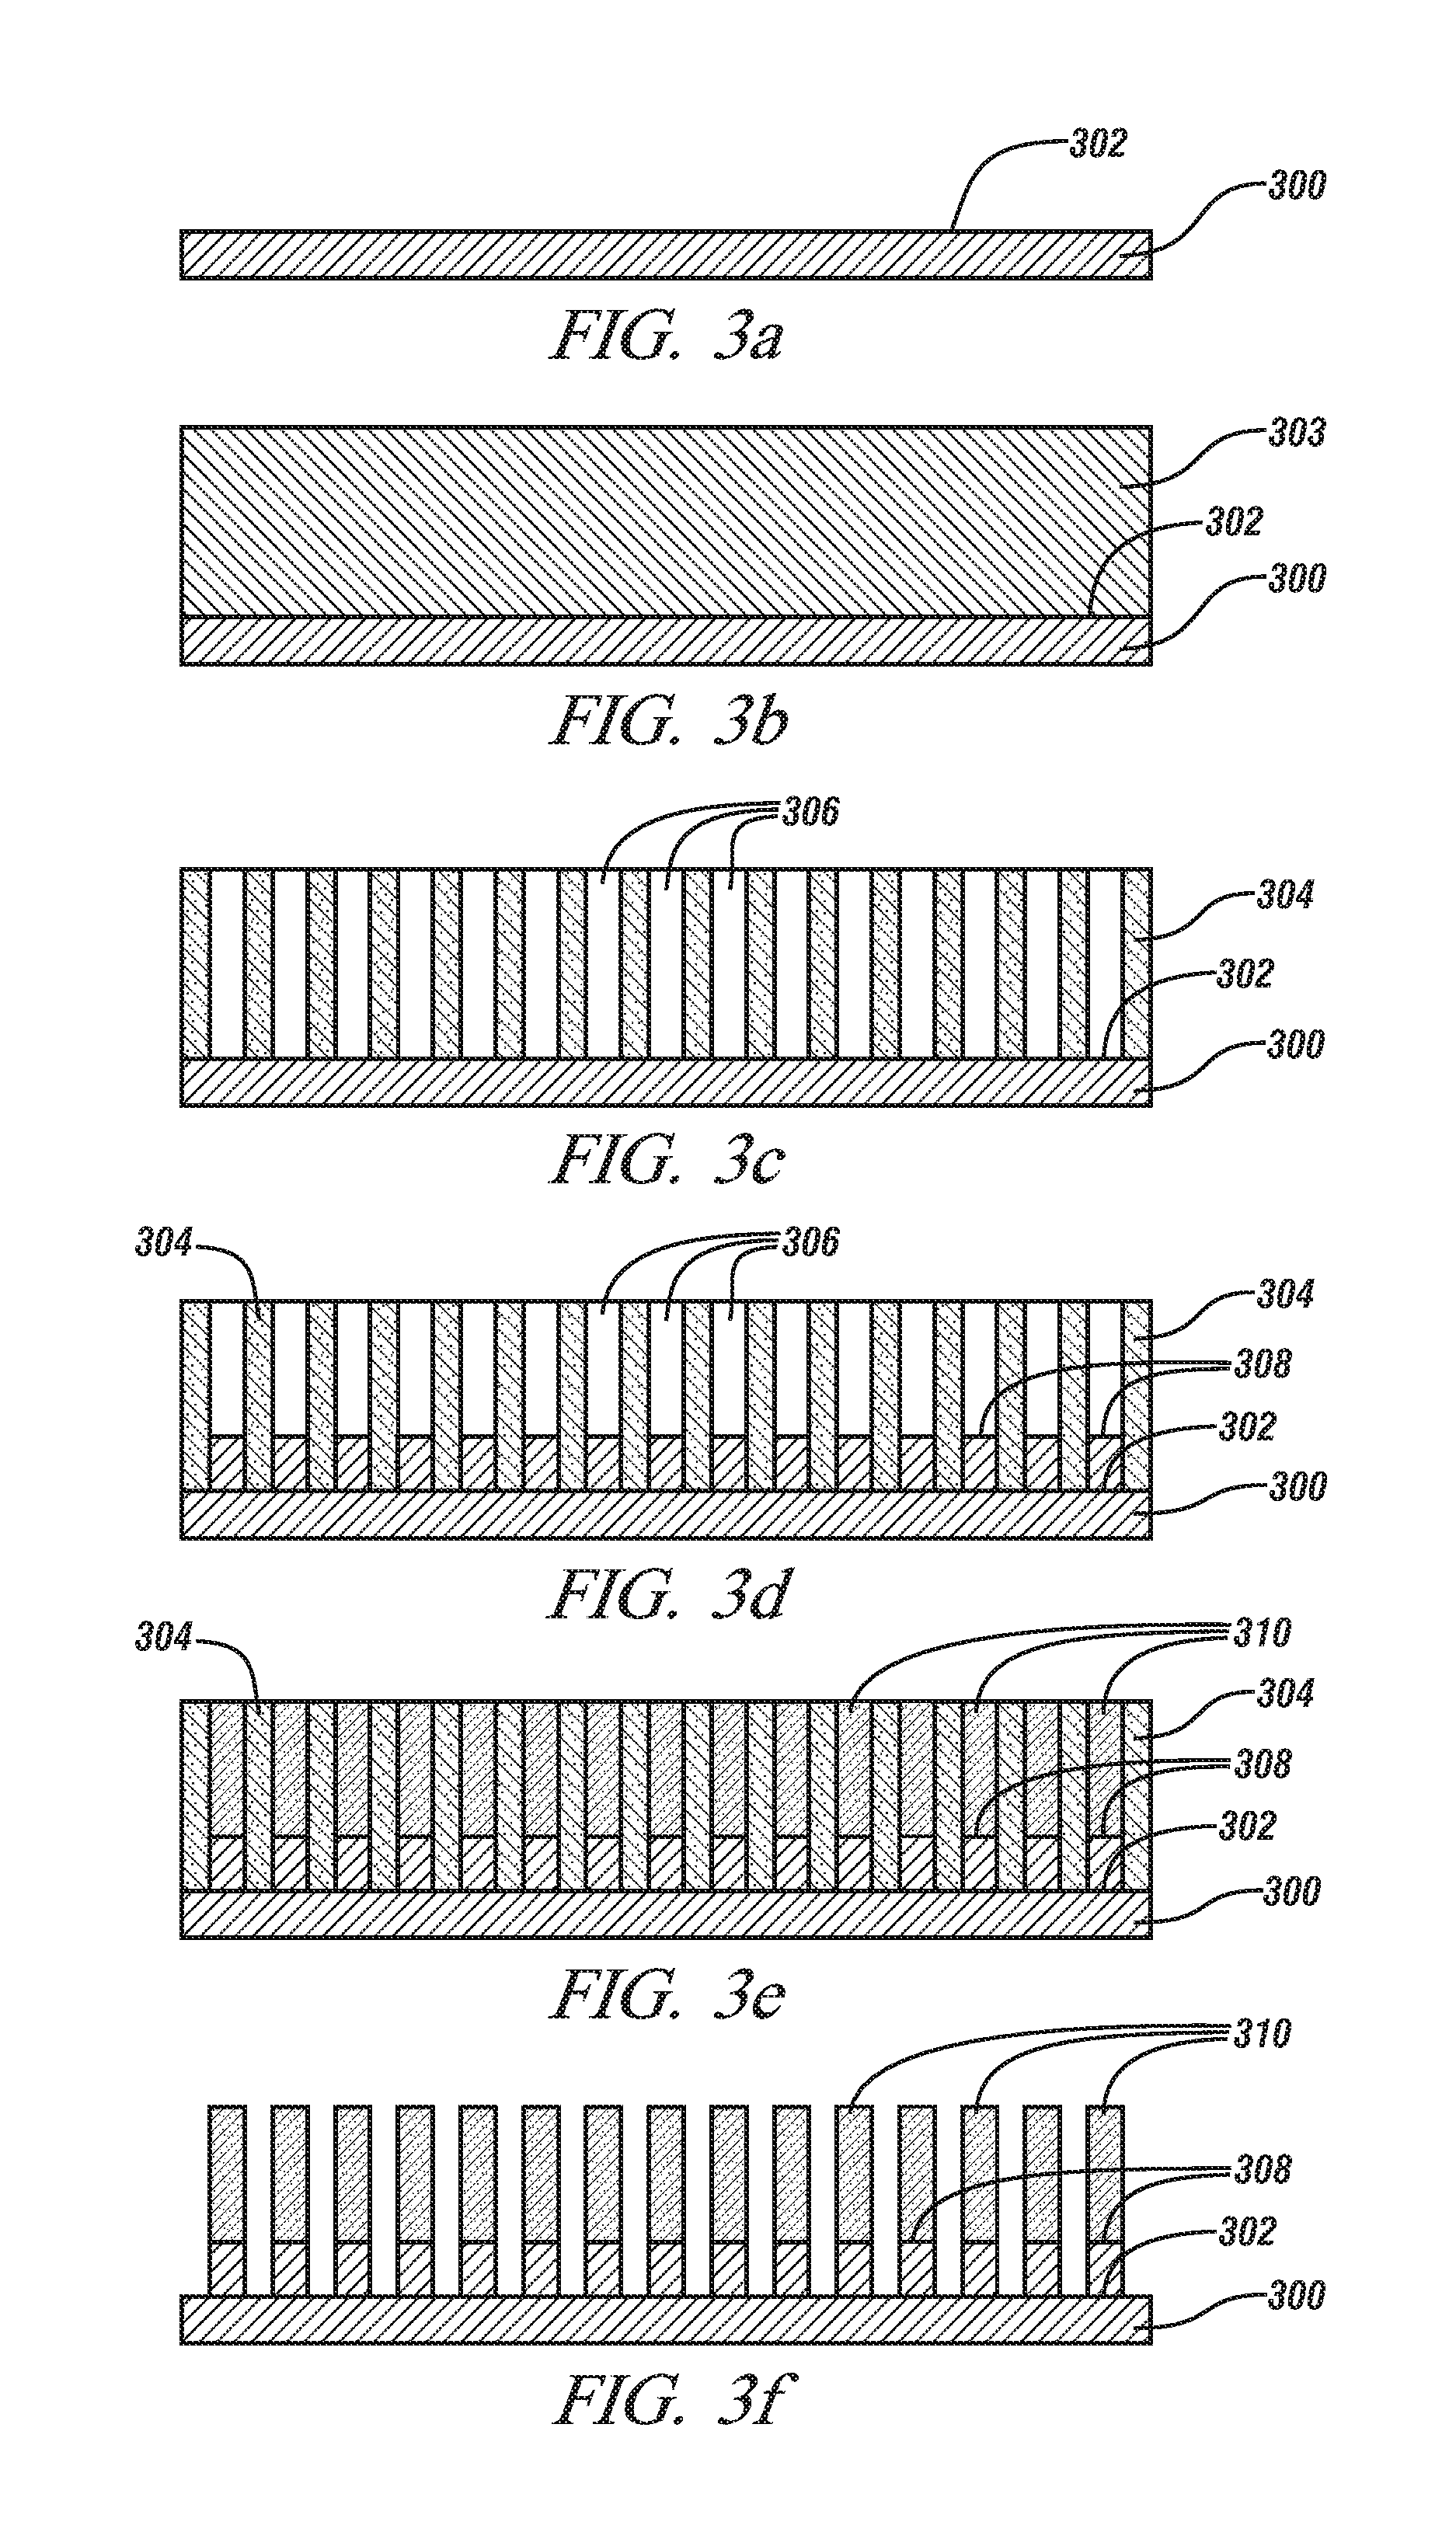 Lithium-ion battery electrodes with shape-memory-alloy current collecting substrates